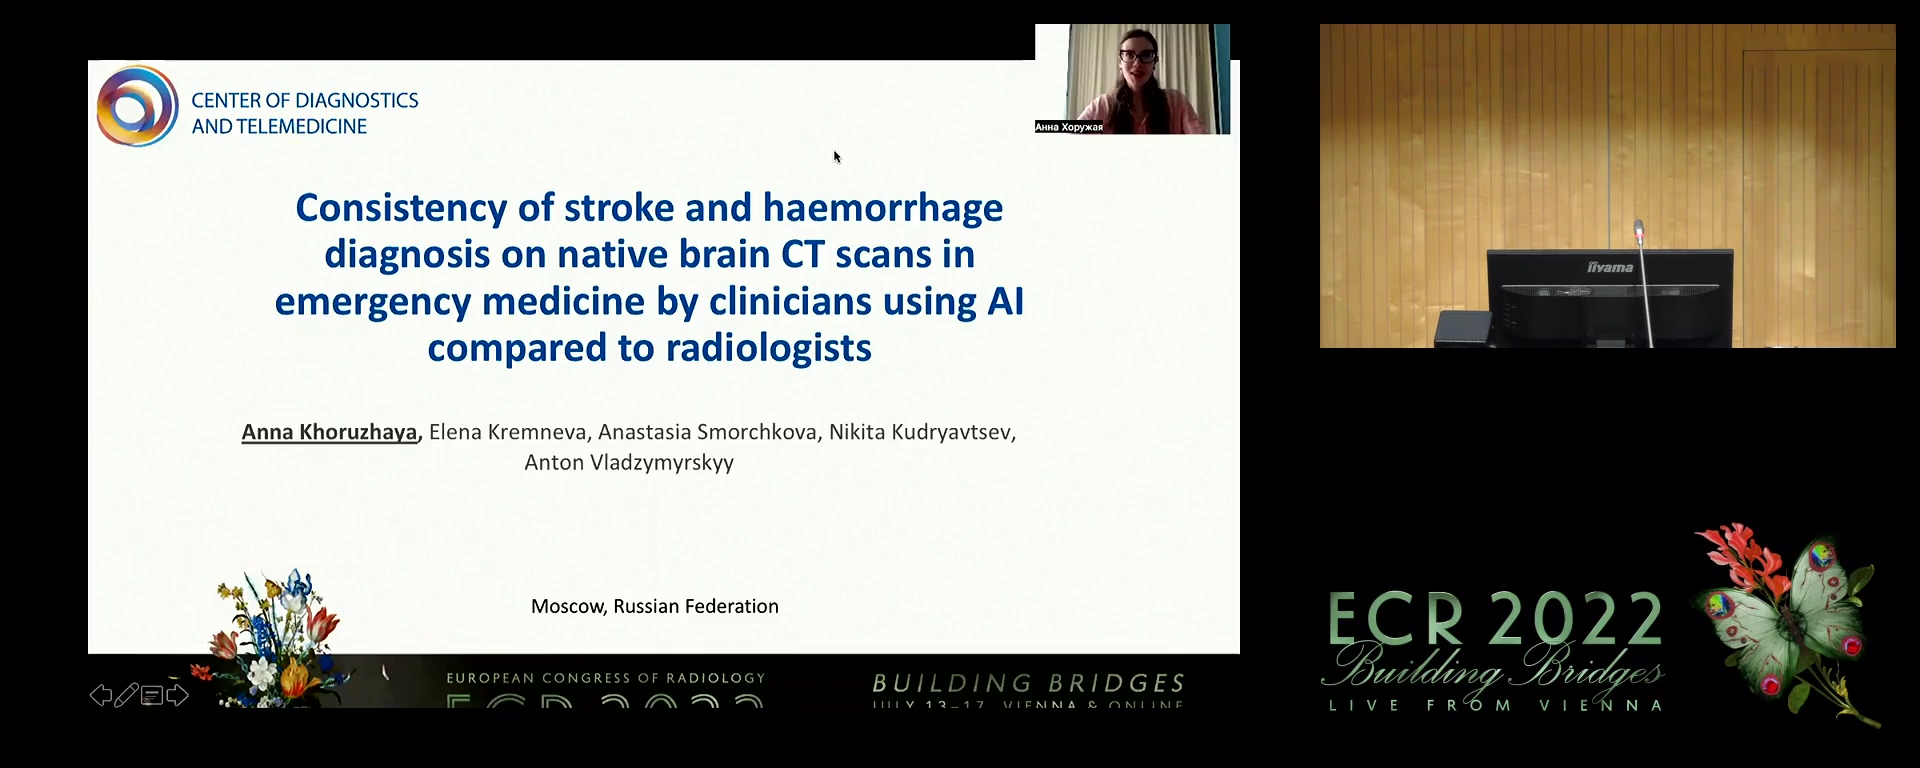 Consistency of stroke and haemorrhage diagnosis on native brain CT scans in emergency medicine by clinicians using AI compared to radiologists - Anna Khoruzhaya, Moscow / RU